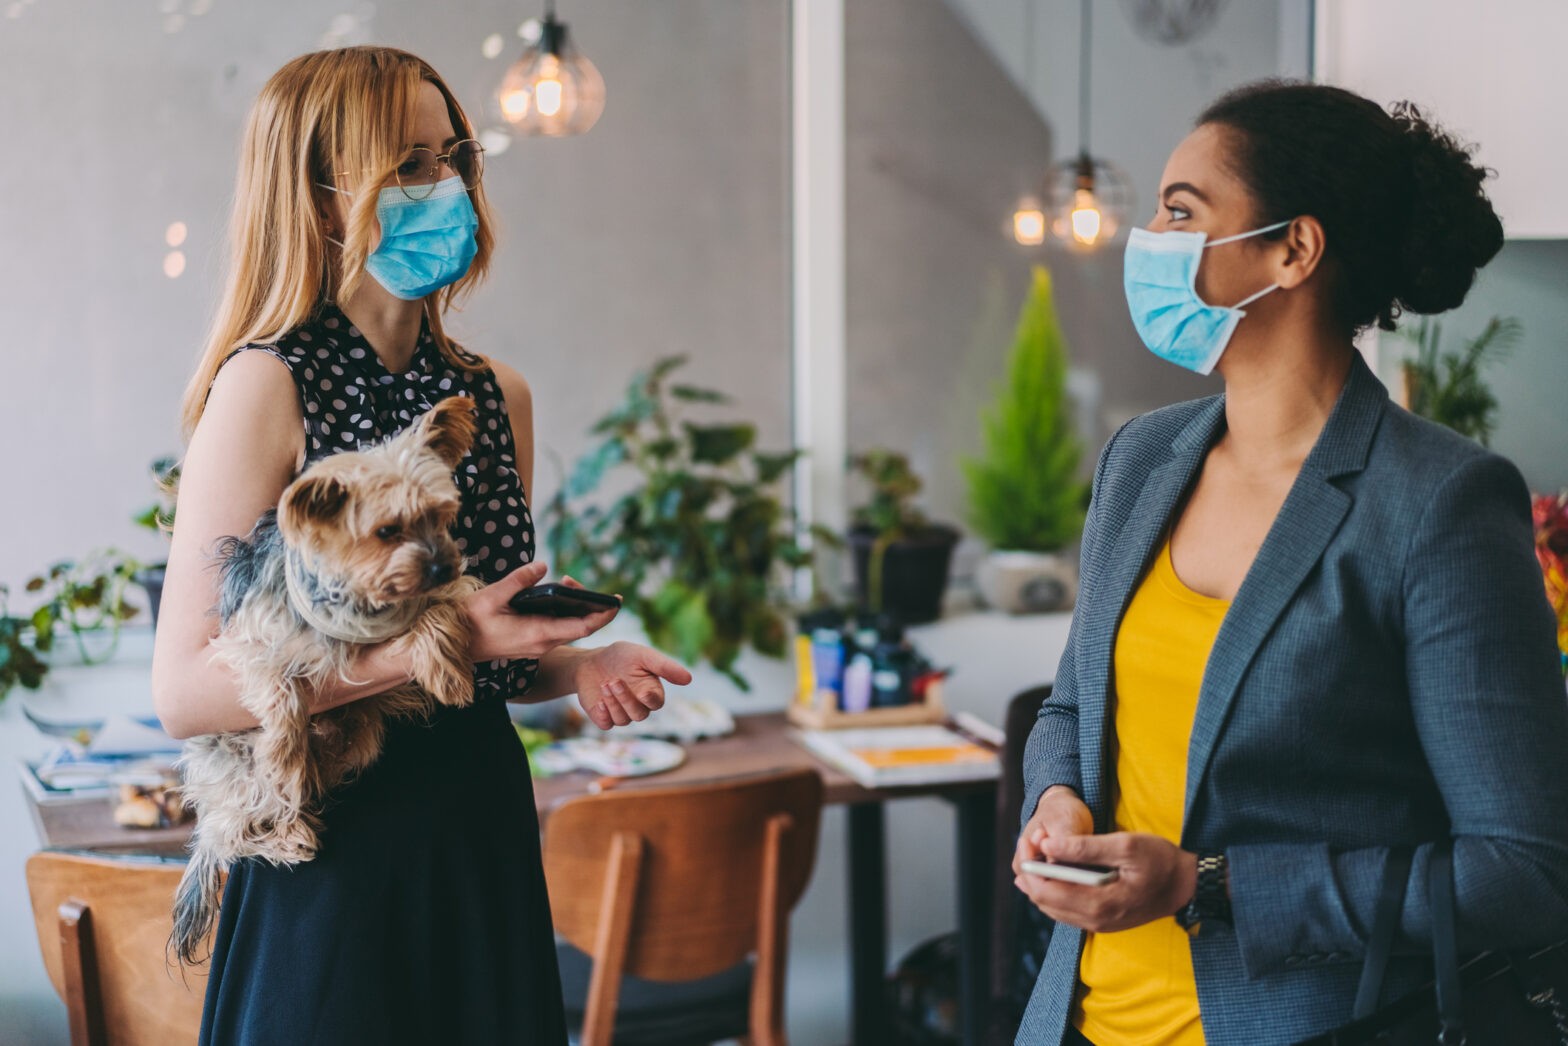 Businesswomen with face masks talking in office, COVID-19 pandemic